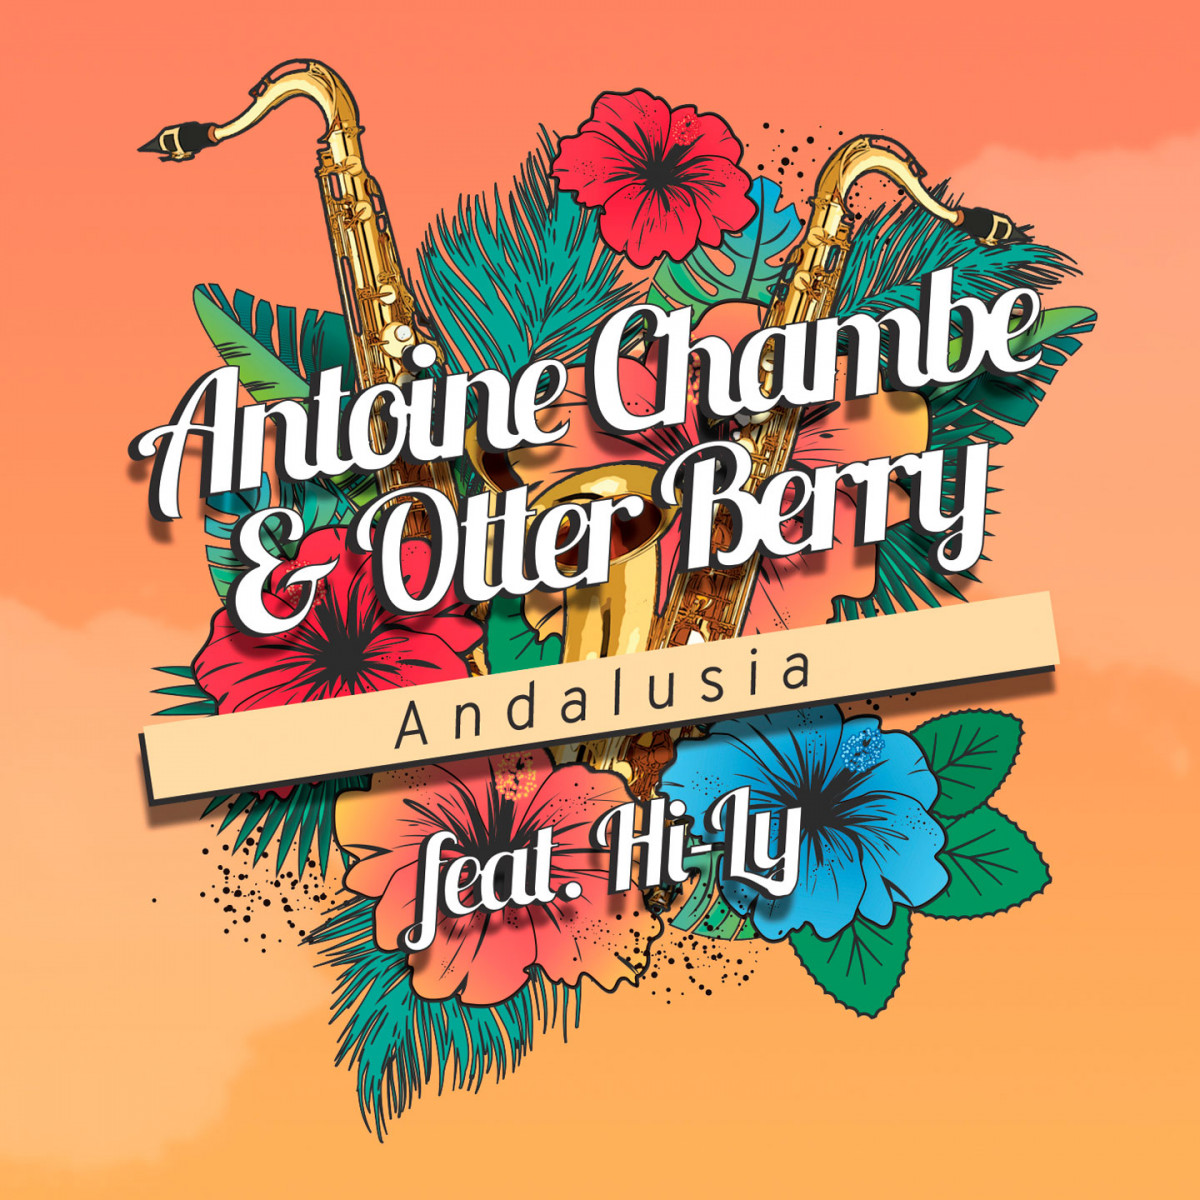 ANTOINE CHAMBE - ANDALUSIA (feat. Otter Berry and Hi-Ly)